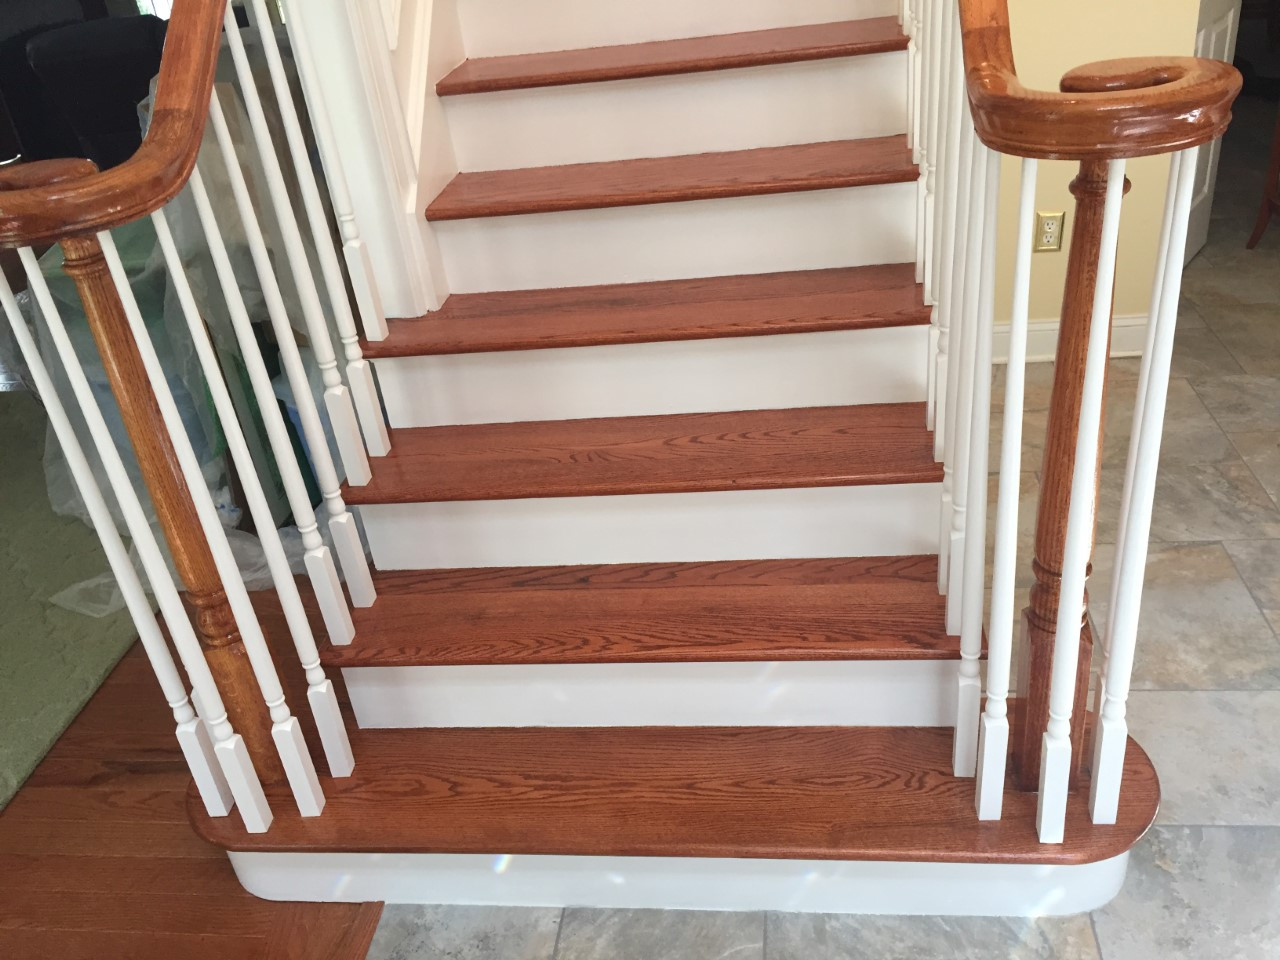 16 Unique Hardwood Floor Refinishing Morristown Nj 2024 free download hardwood floor refinishing morristown nj of stairs snanding and refinishing installing new steps wood floors pertaining to we used festools dustless stairs sanding system our services floori